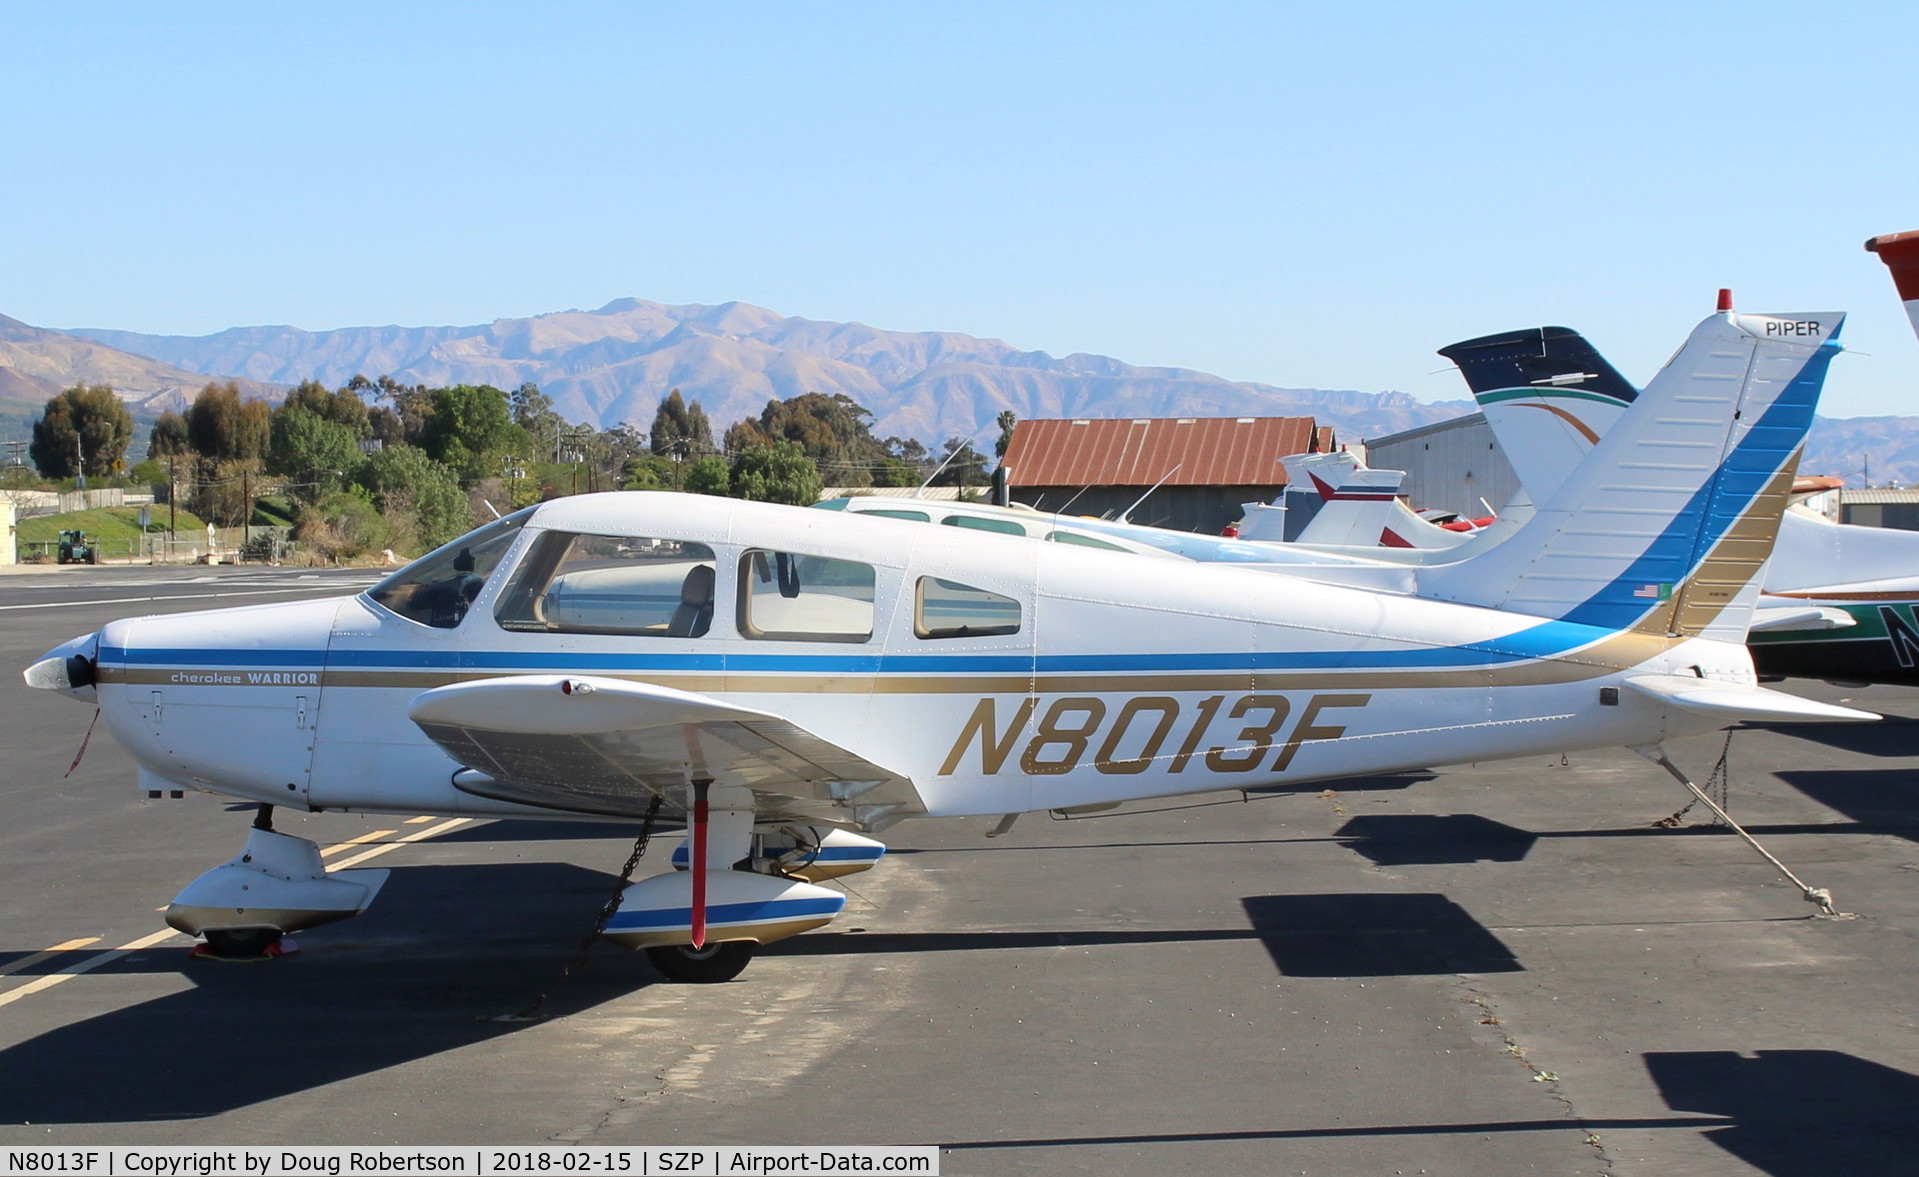 N8013F, 1976 Piper PA-28-151 Warrior C/N 28-7715252, 1976 Piper PA-28-151 WARRIOR, Lycoming O-320-E2D 150 Hp